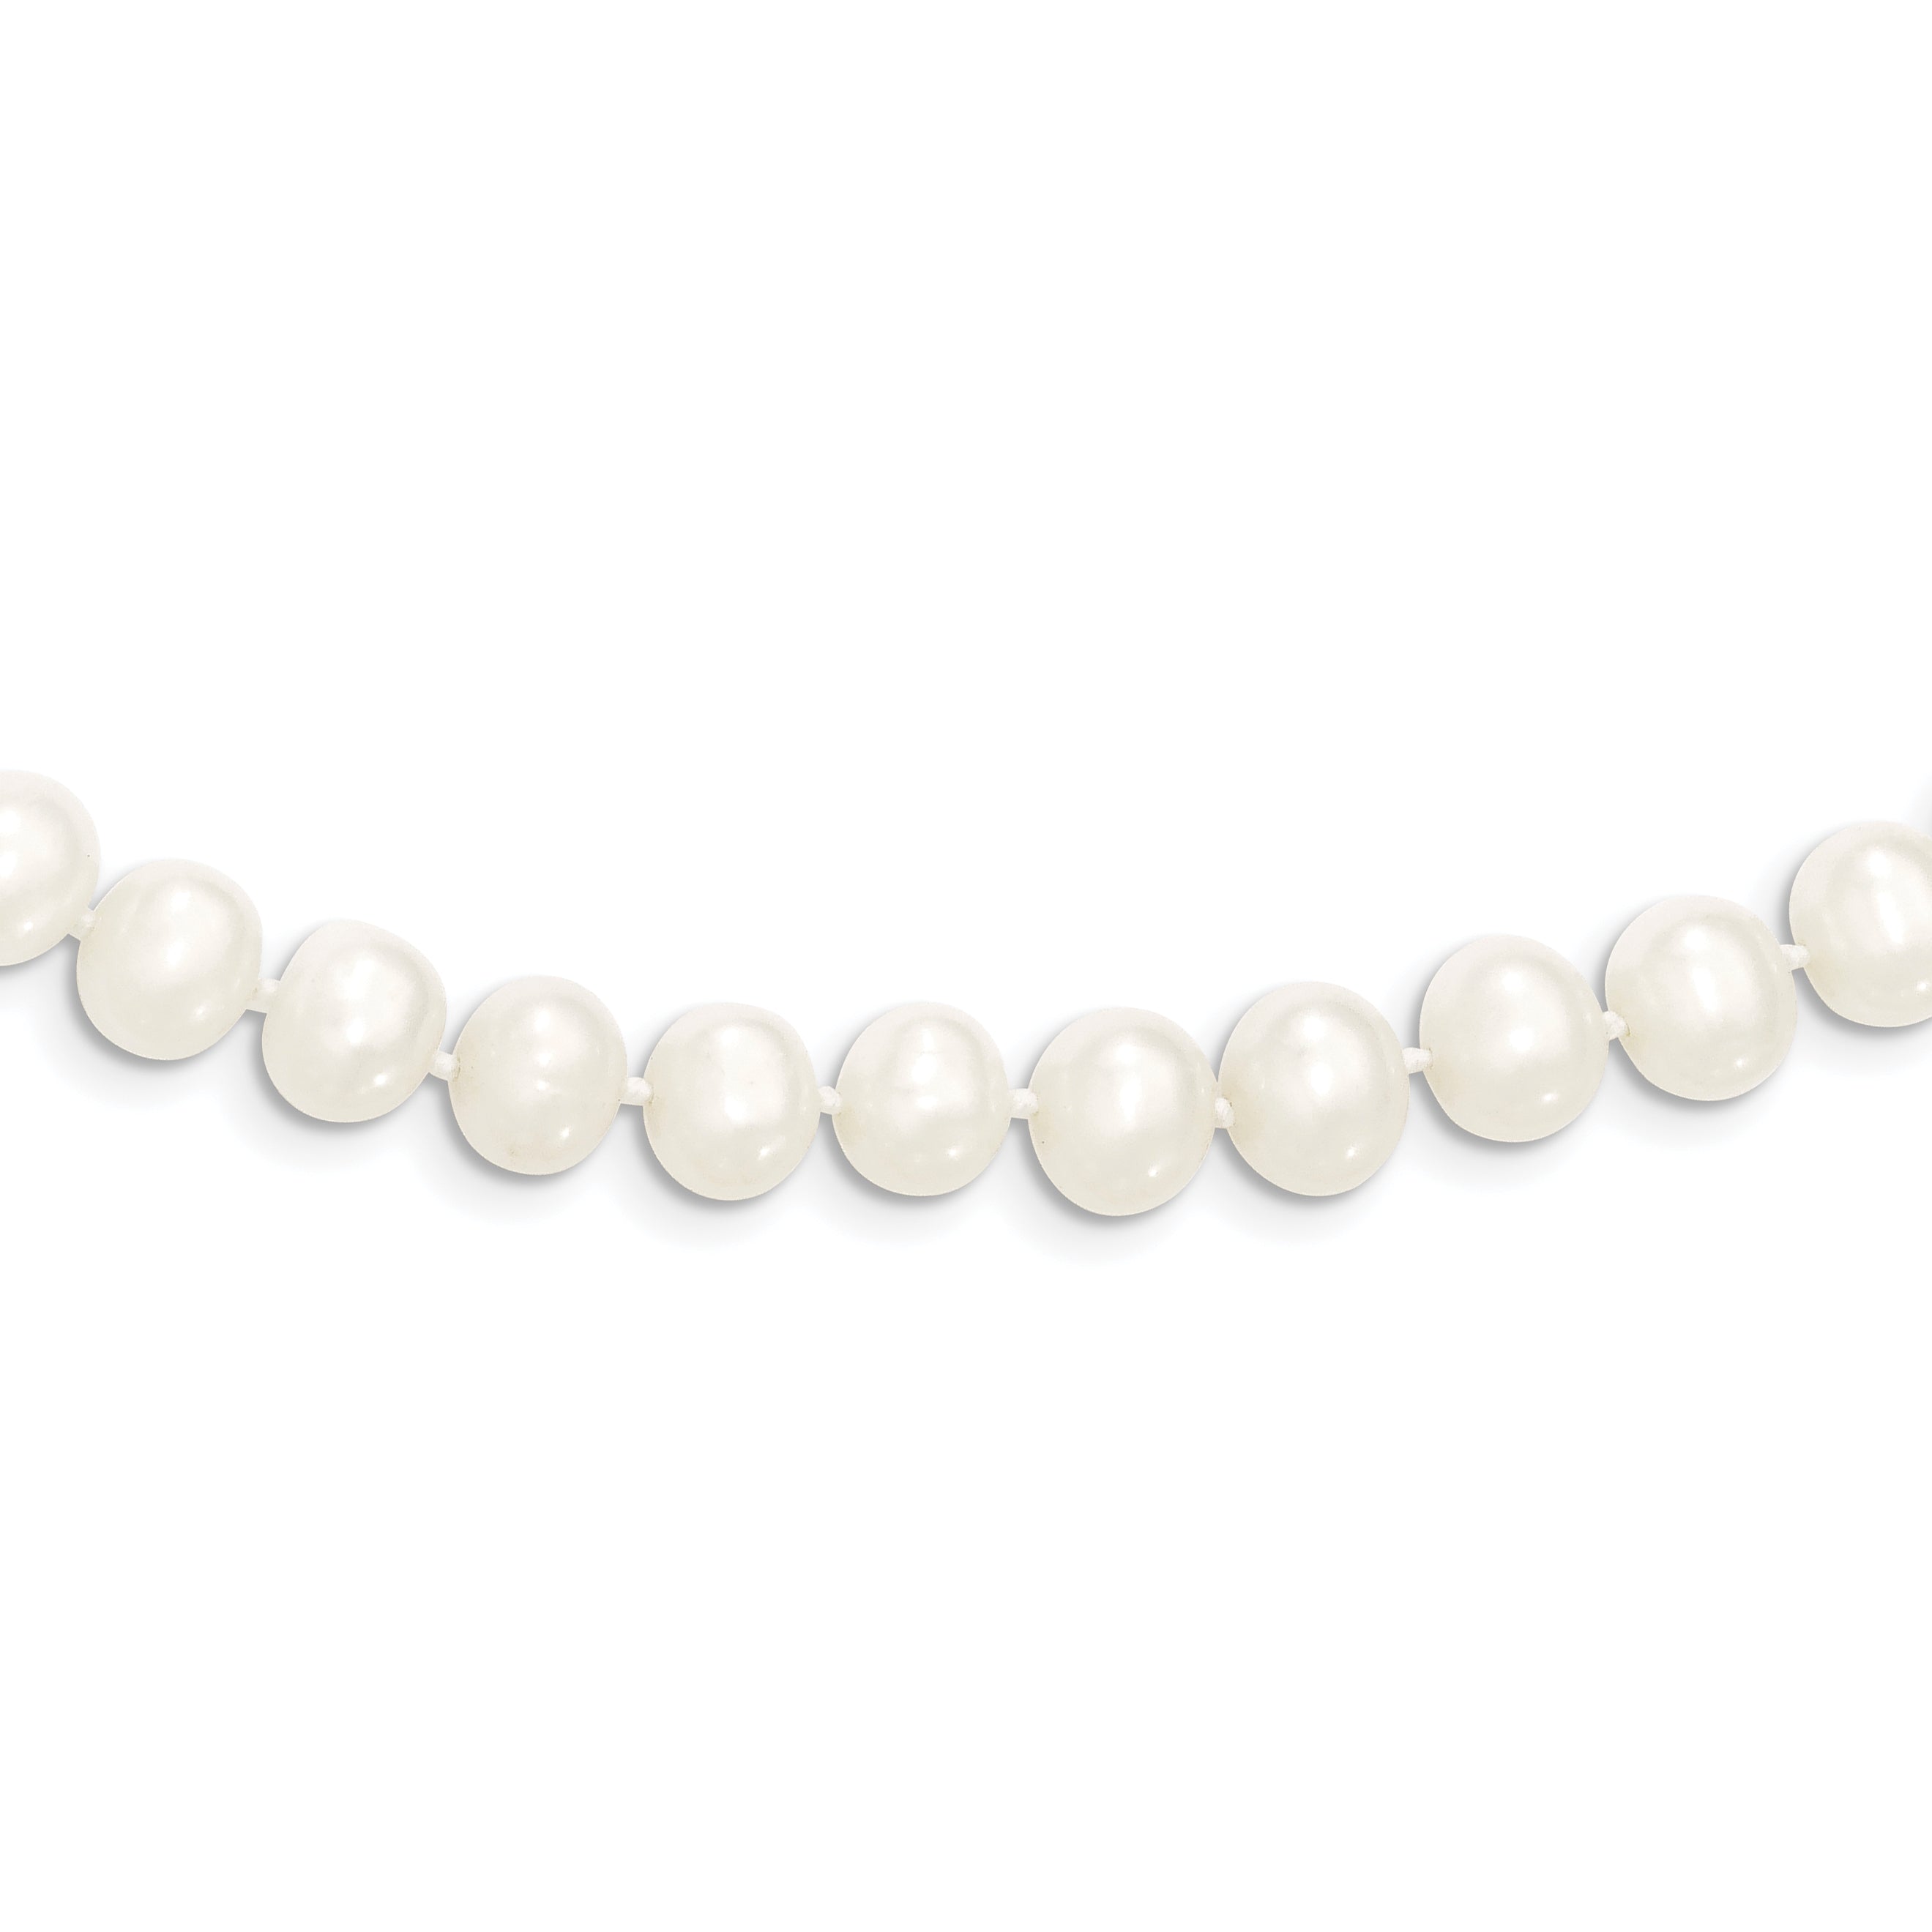 6-7mm White Semi-round Freshwater Cultured Pearl Slip-on Endless 80 inch Necklace